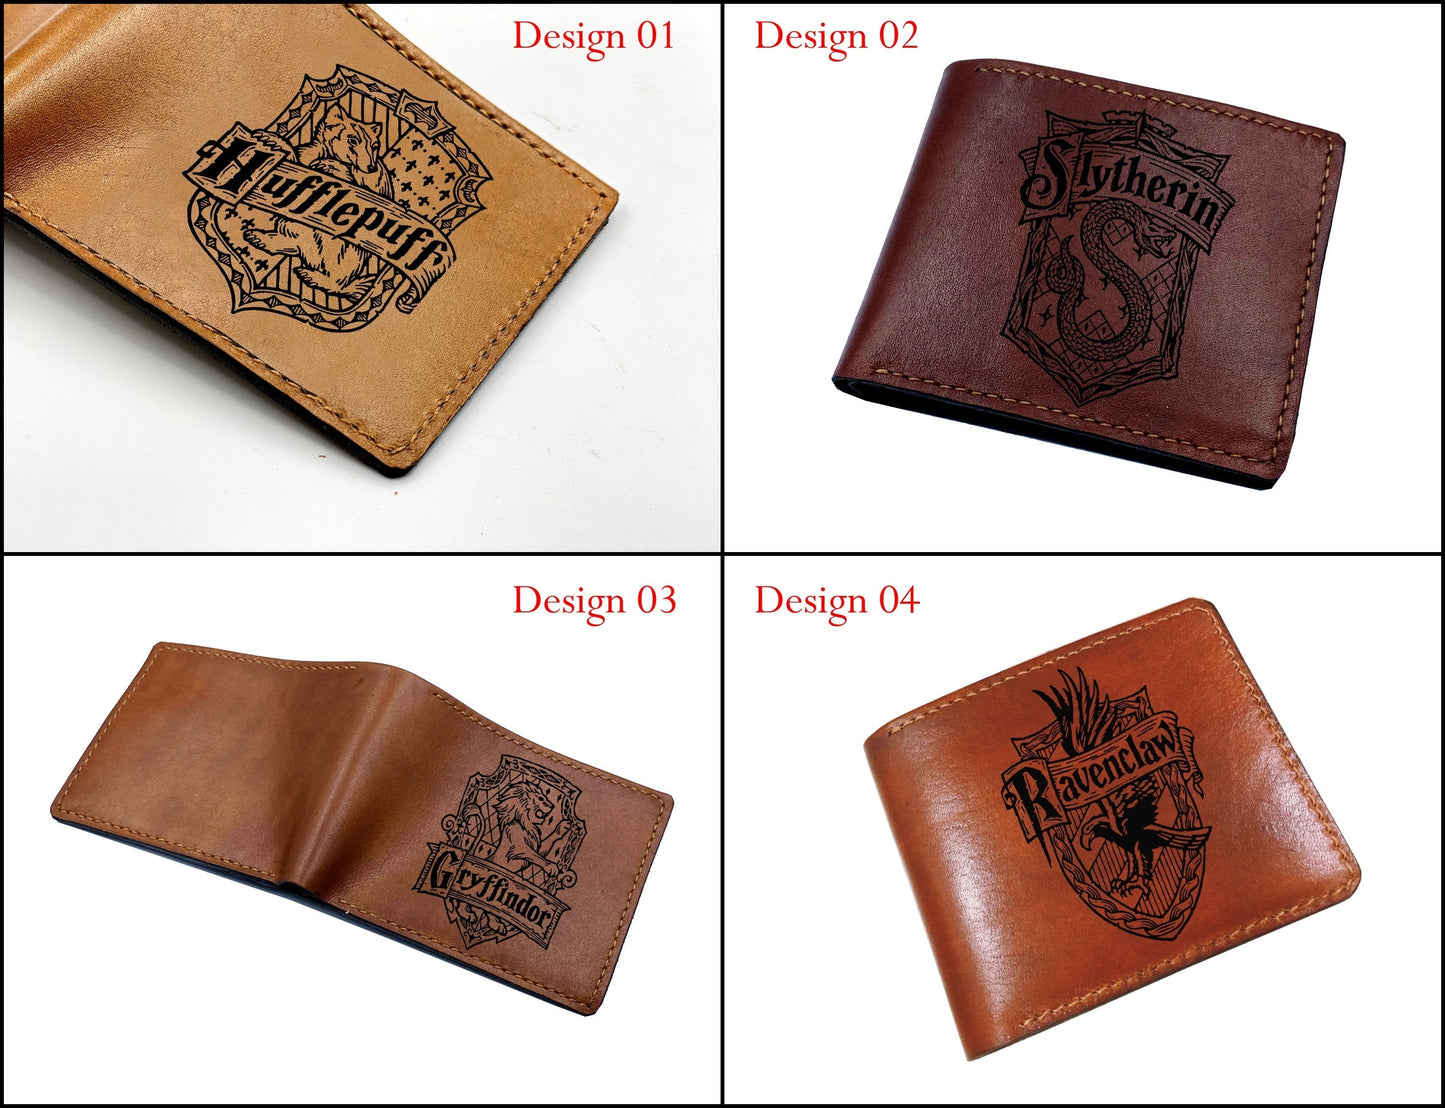 Mayan Corner - Harry Porter leather men wallet, birthday gift idea for friends, The Deathly Hallows symbol leather wallet